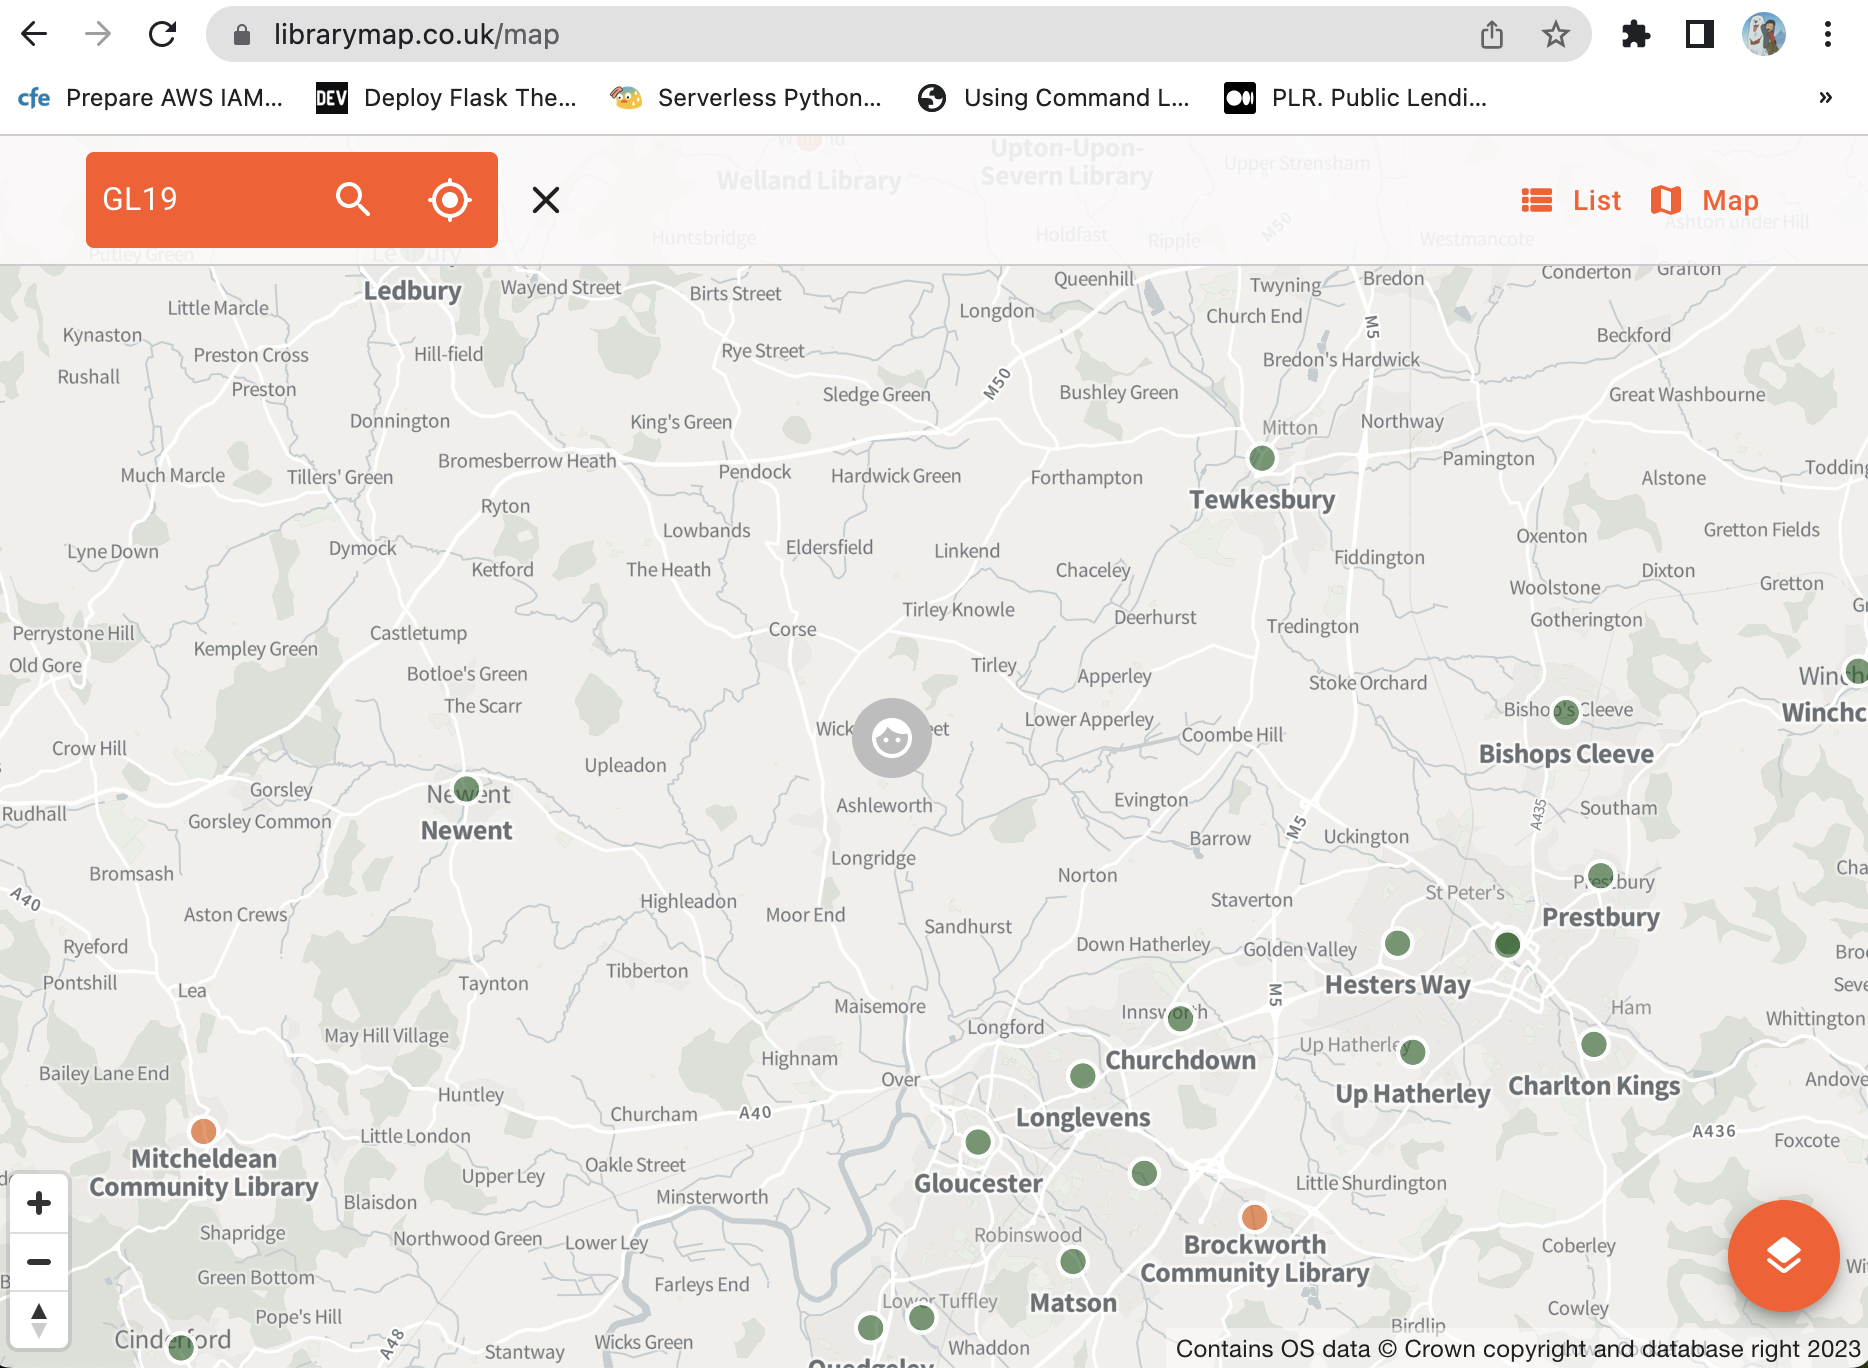 A screenshot of the map page on LibraryMap showing a rural location in Gloucestershire, and surrounding libraries